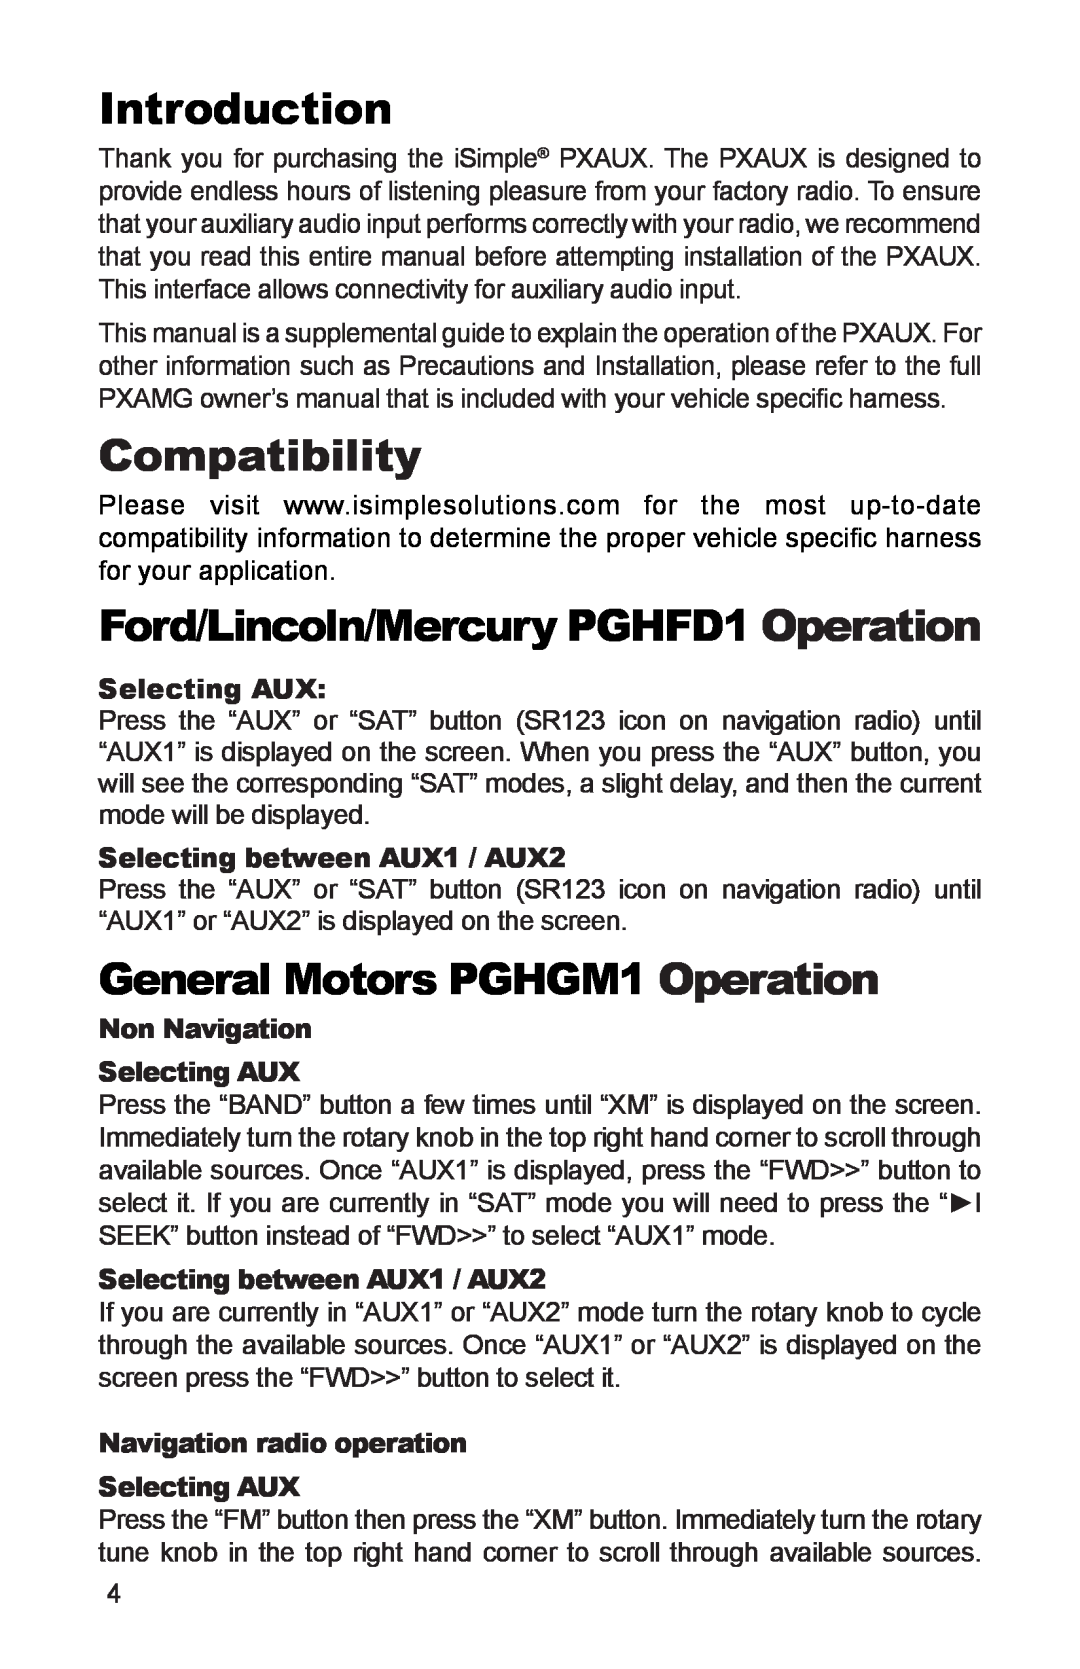 iSimple PGHHD1, PGHGM5 Introduction, Compatibility, Ford/Lincoln/Mercury PGHFD1 Operation, General Motors PGHGM1 Operation 